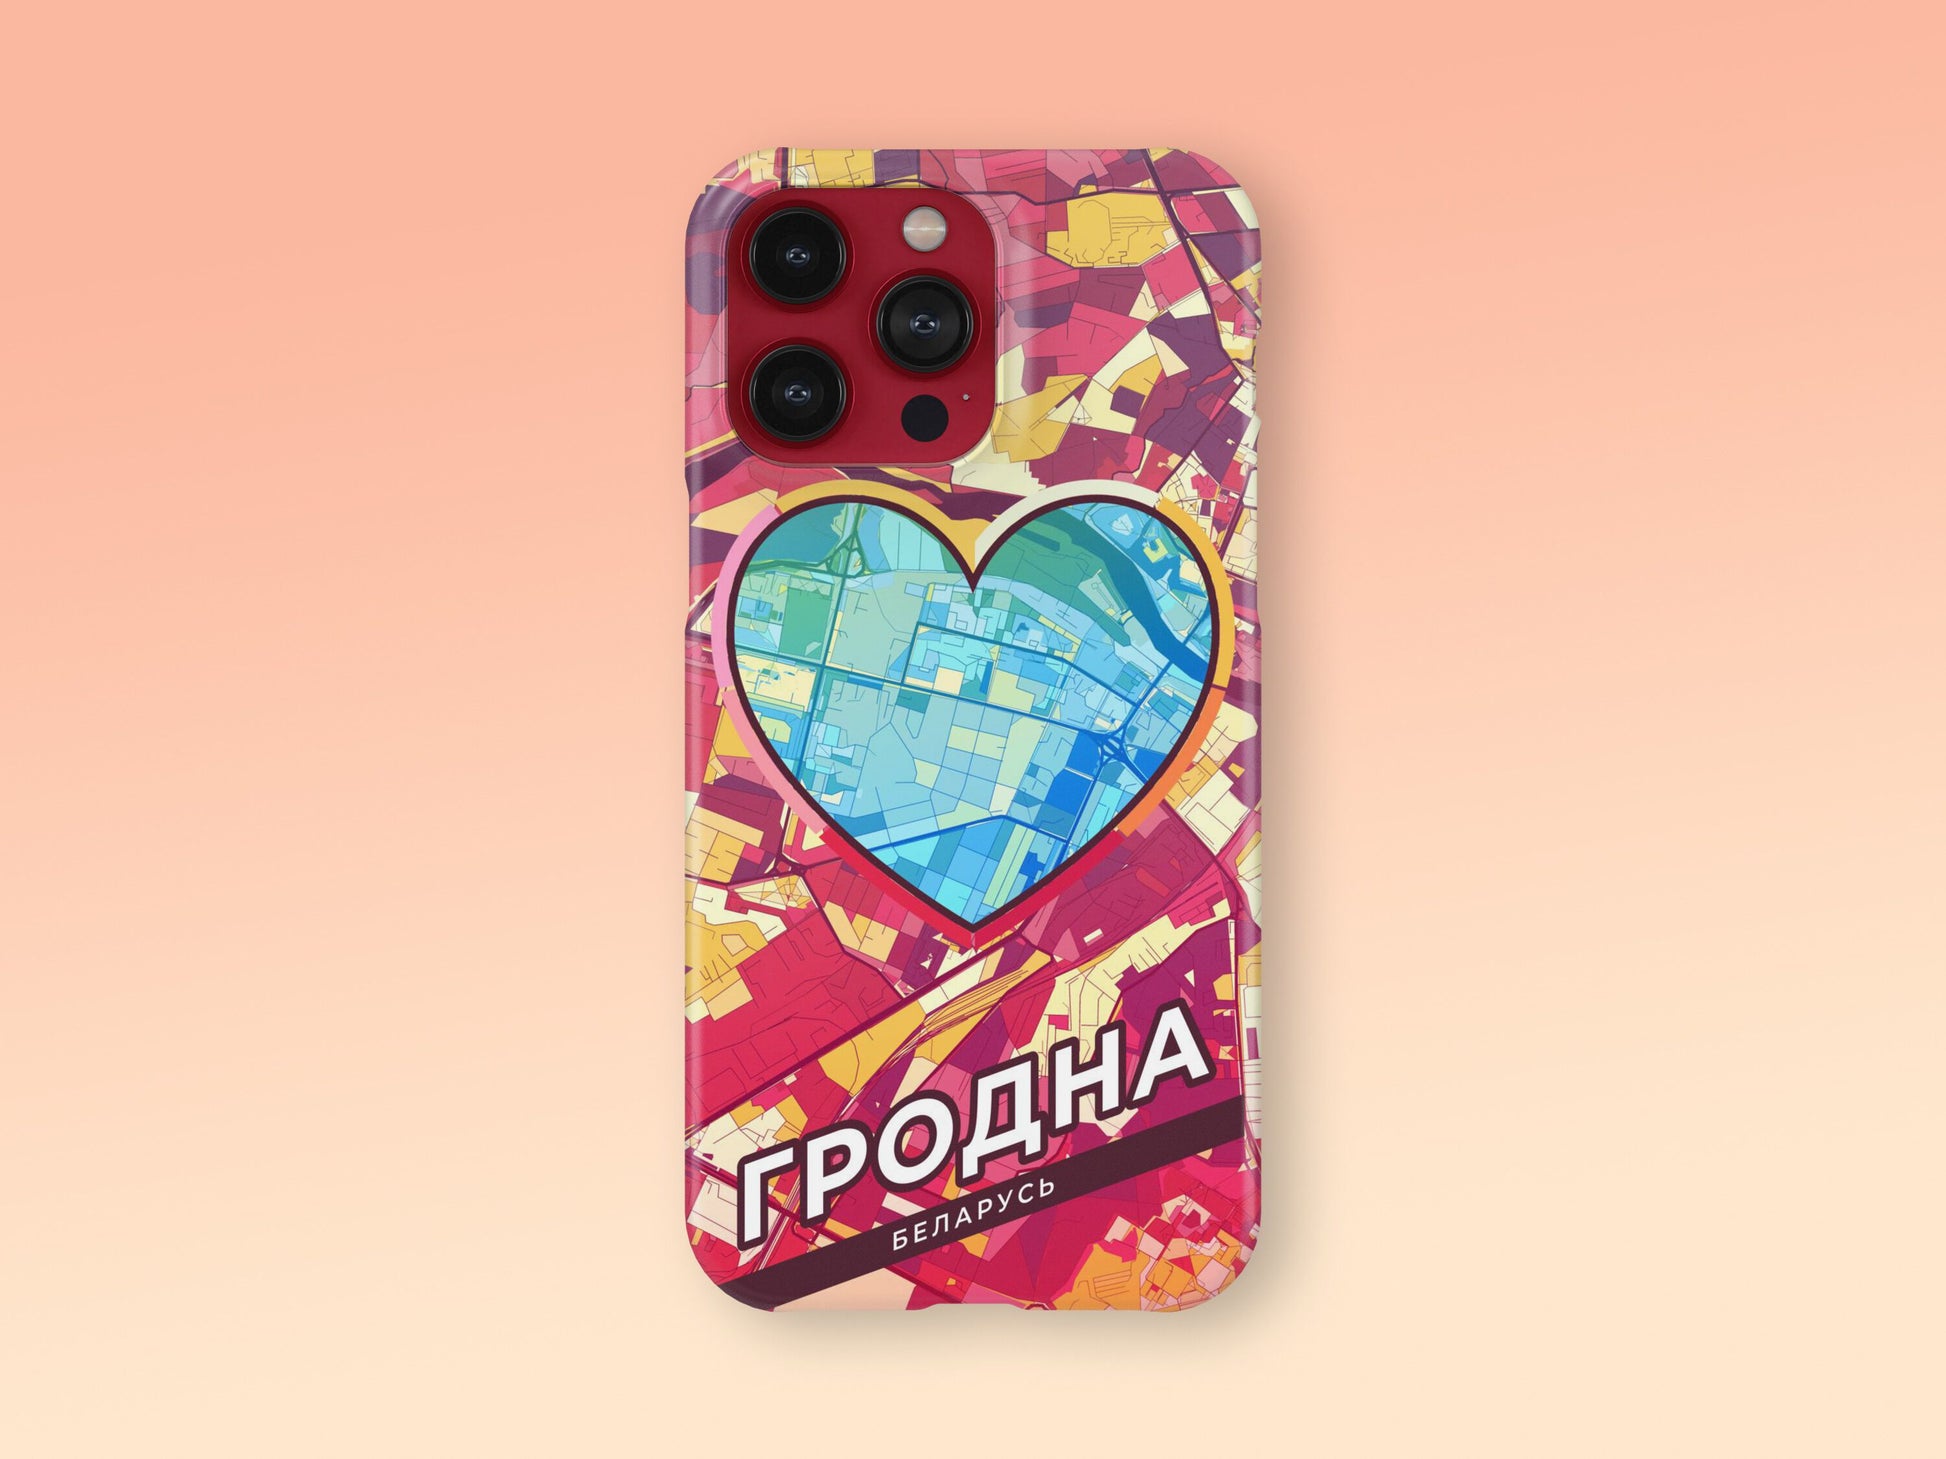 Гродна Беларусь slim phone case with colorful icon. Birthday, wedding or housewarming gift. Couple match cases. 2